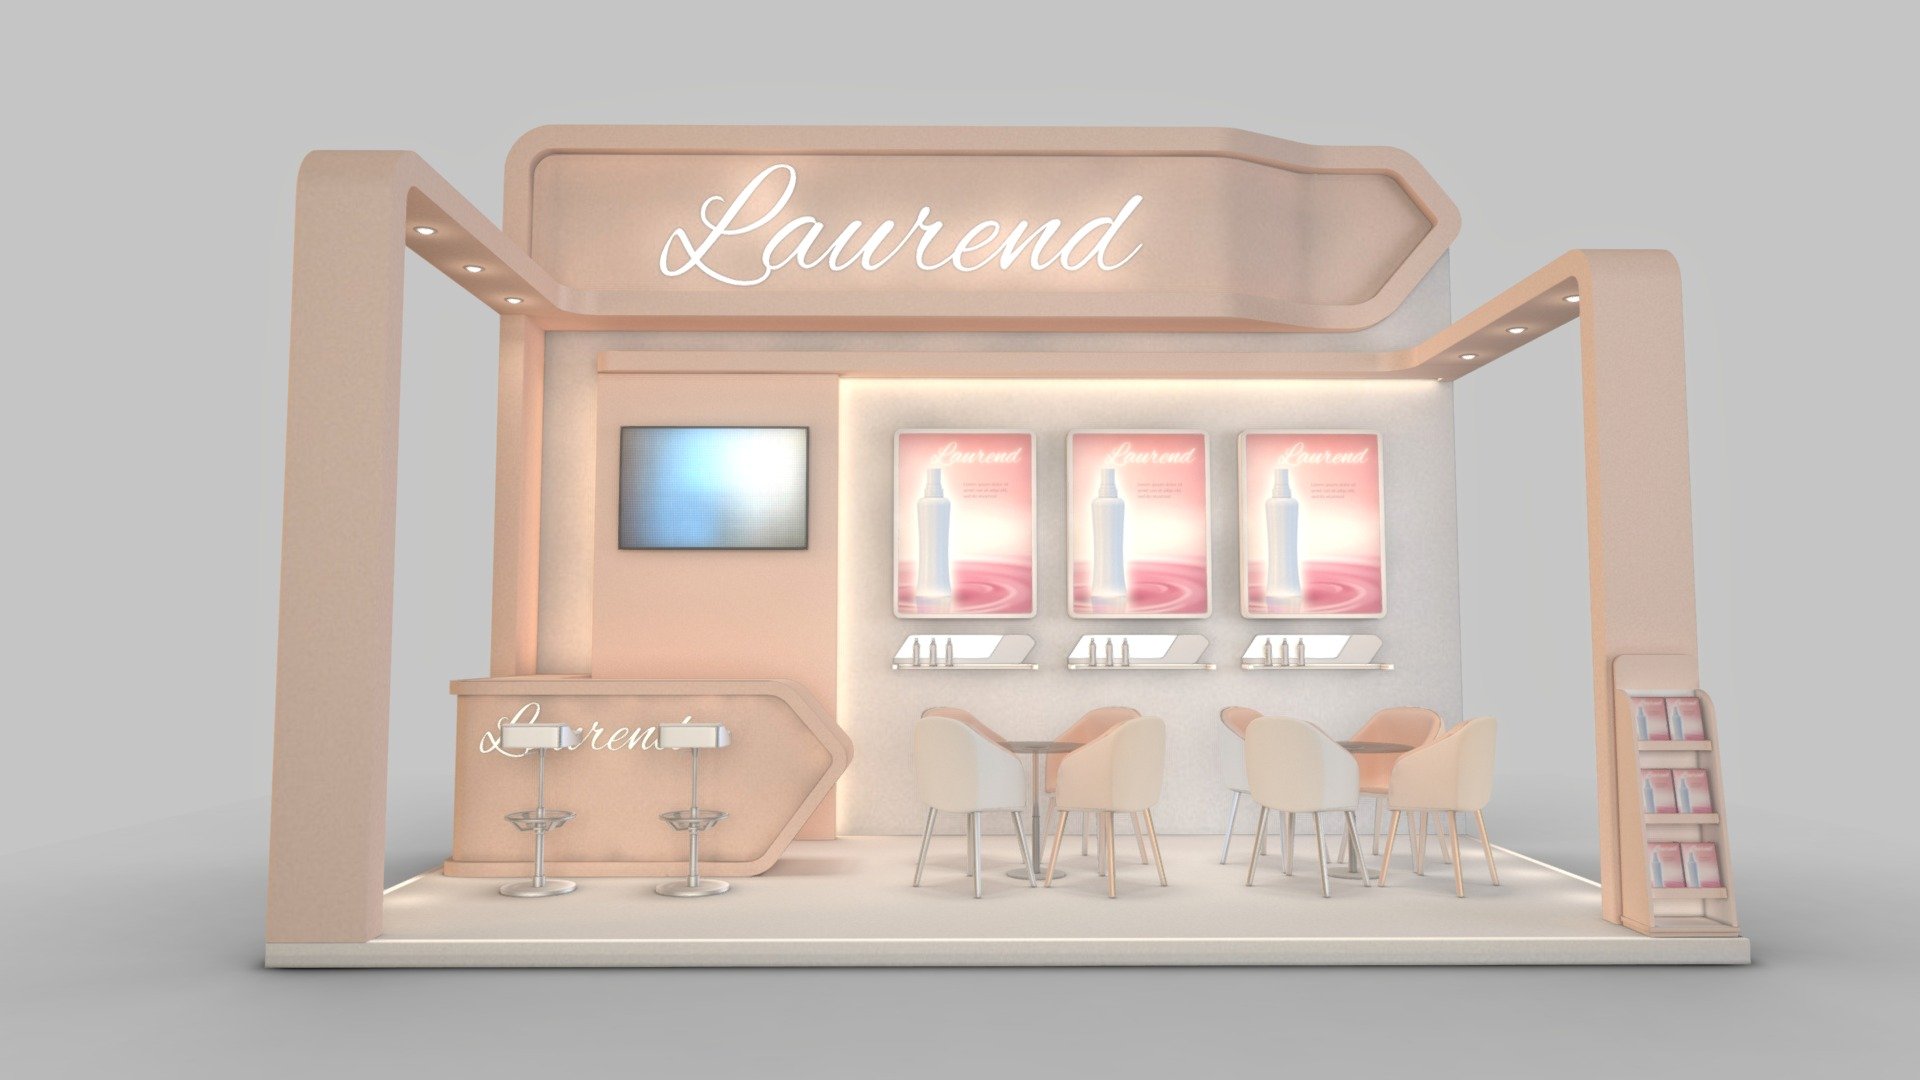 EXHIBITION STAND DESIGN 3D model

18 sqm / 3 exposed side
max height: 450cm

Unit: cm

format:
1. Autodesk 3Ds max 2018 _ Vray 3.60.03 render



Autodesk 3Ds max 2015 _ default scanline render



FBX format



Obj format (standart map texture)



Obj format Vray complete map (embed texture)


 - EXHIBITION STAND MLS 18 sqm - Buy Royalty Free 3D model by fasih.lisan 3d model